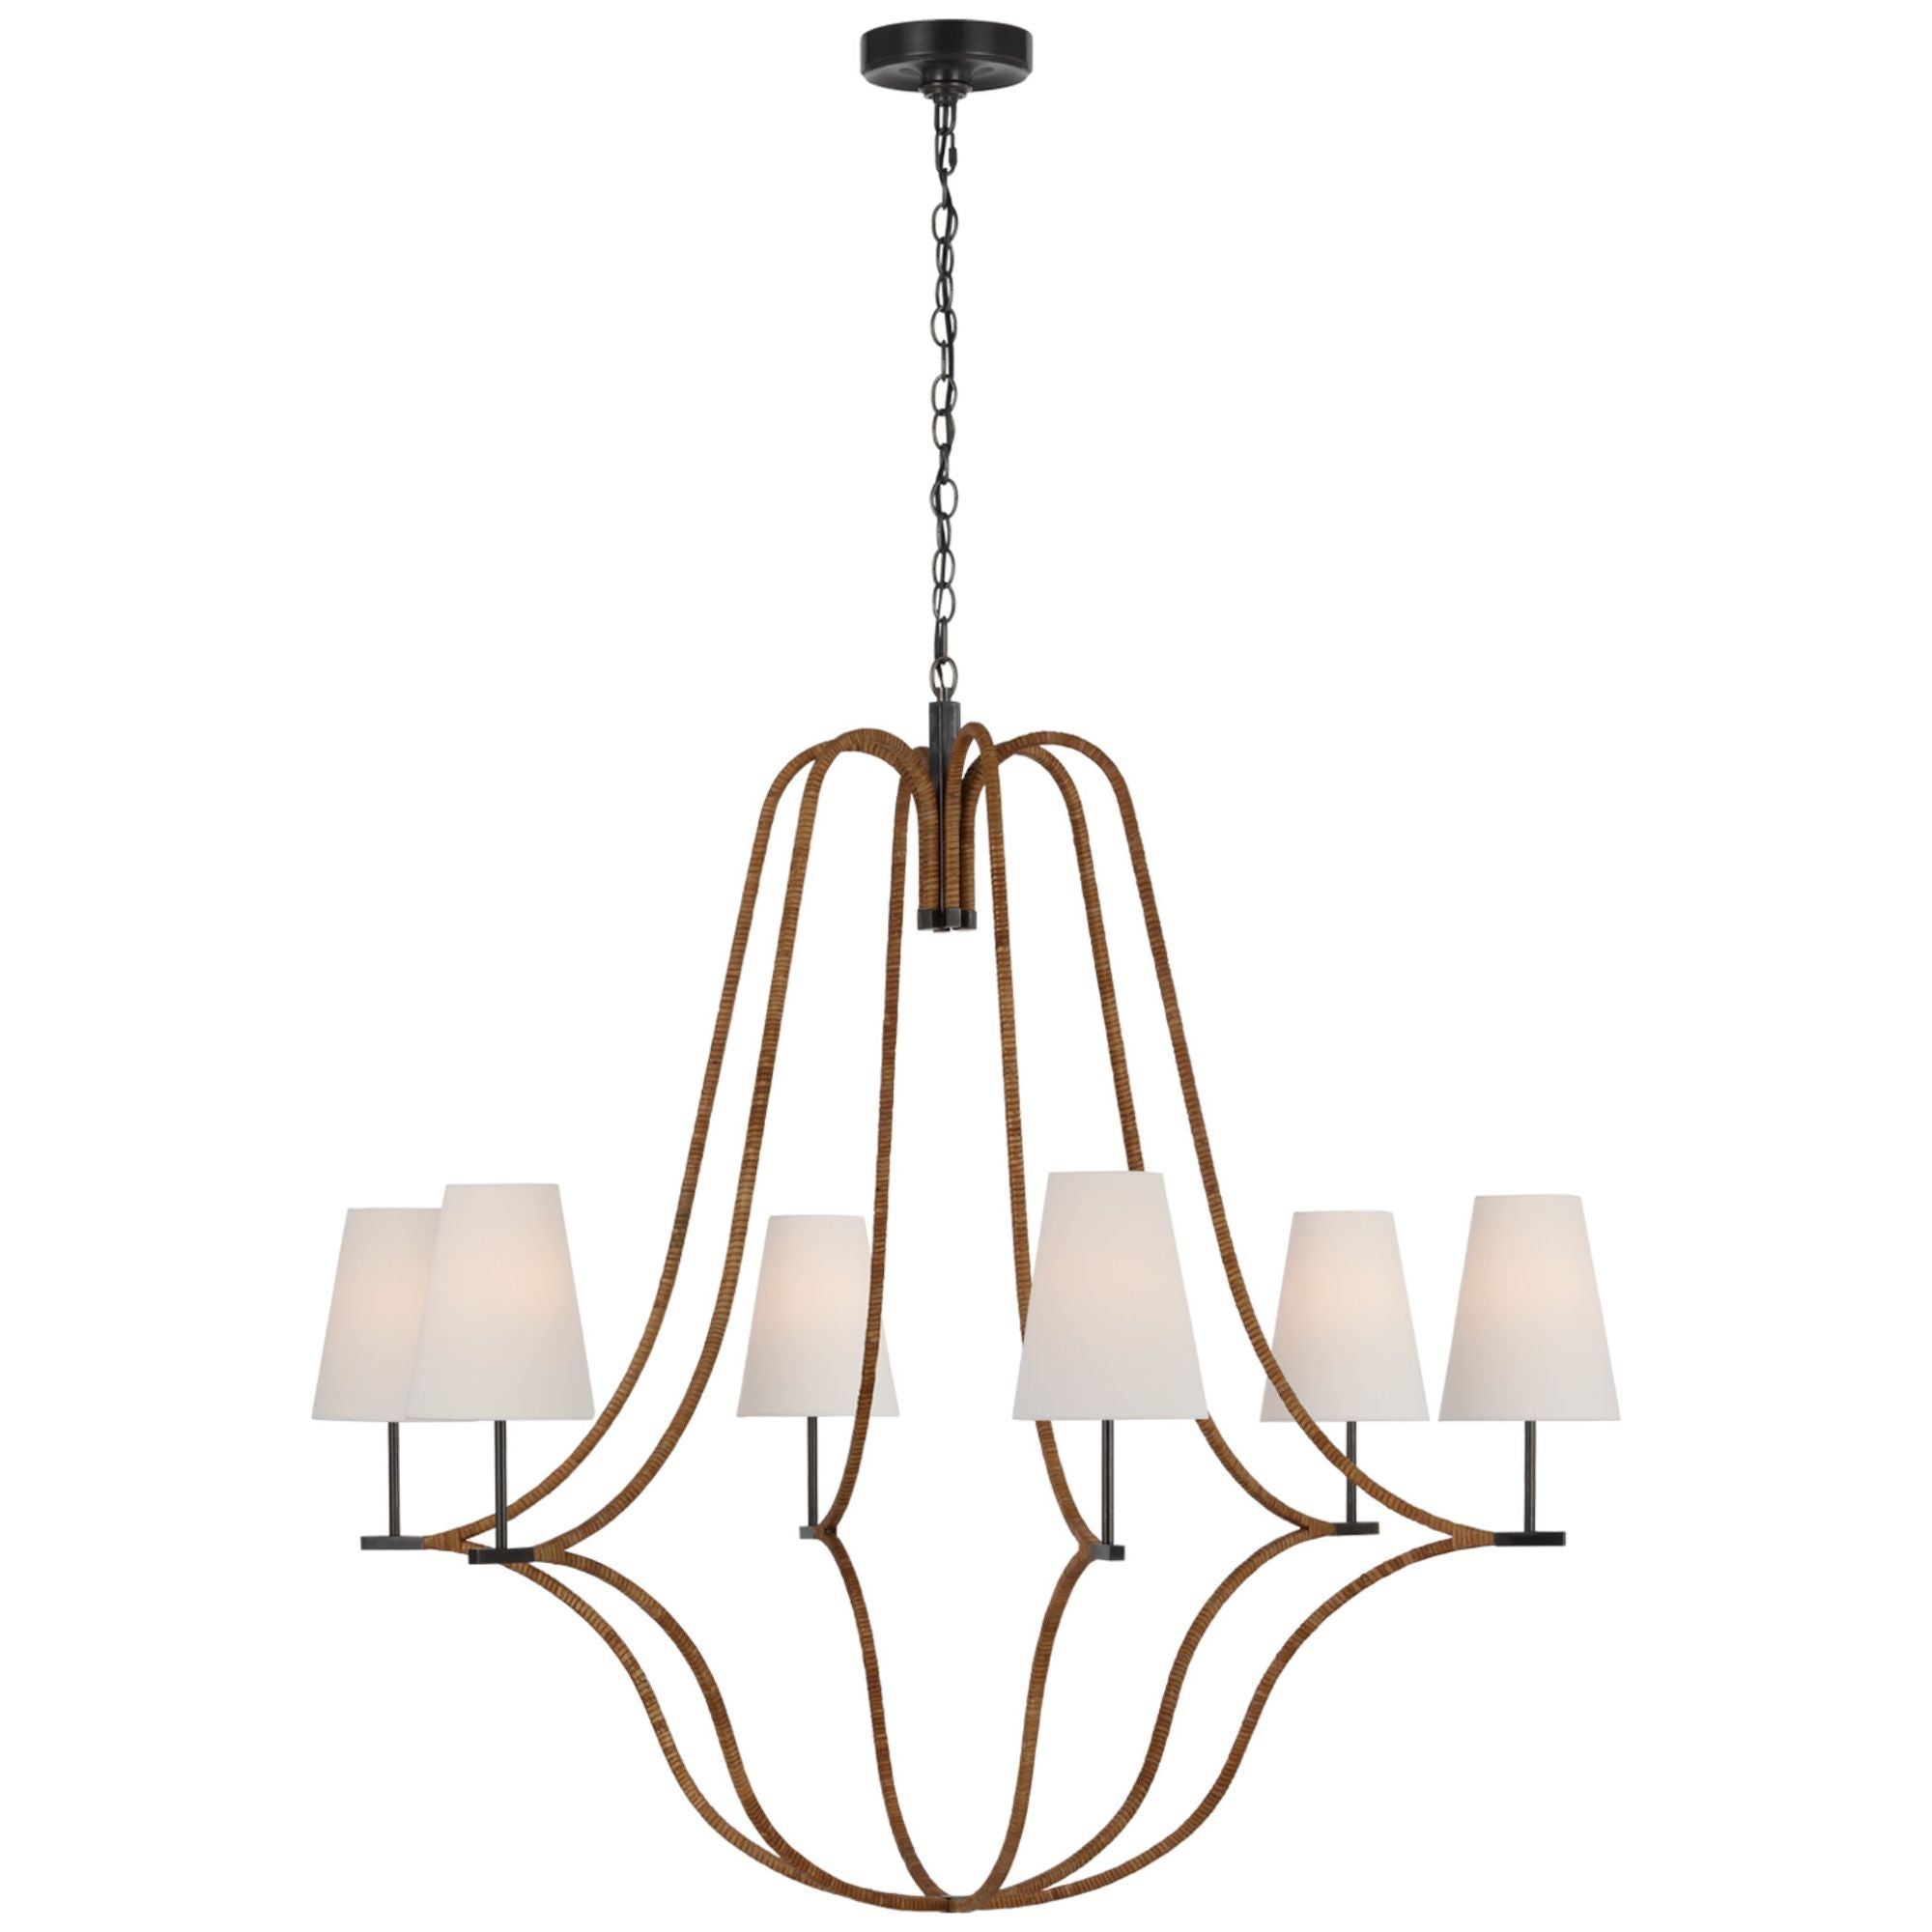 Chapman & Myers Biscayne Extra Large Wrapped Chandelier in Bronze and Natural Rattan with Linen Shades